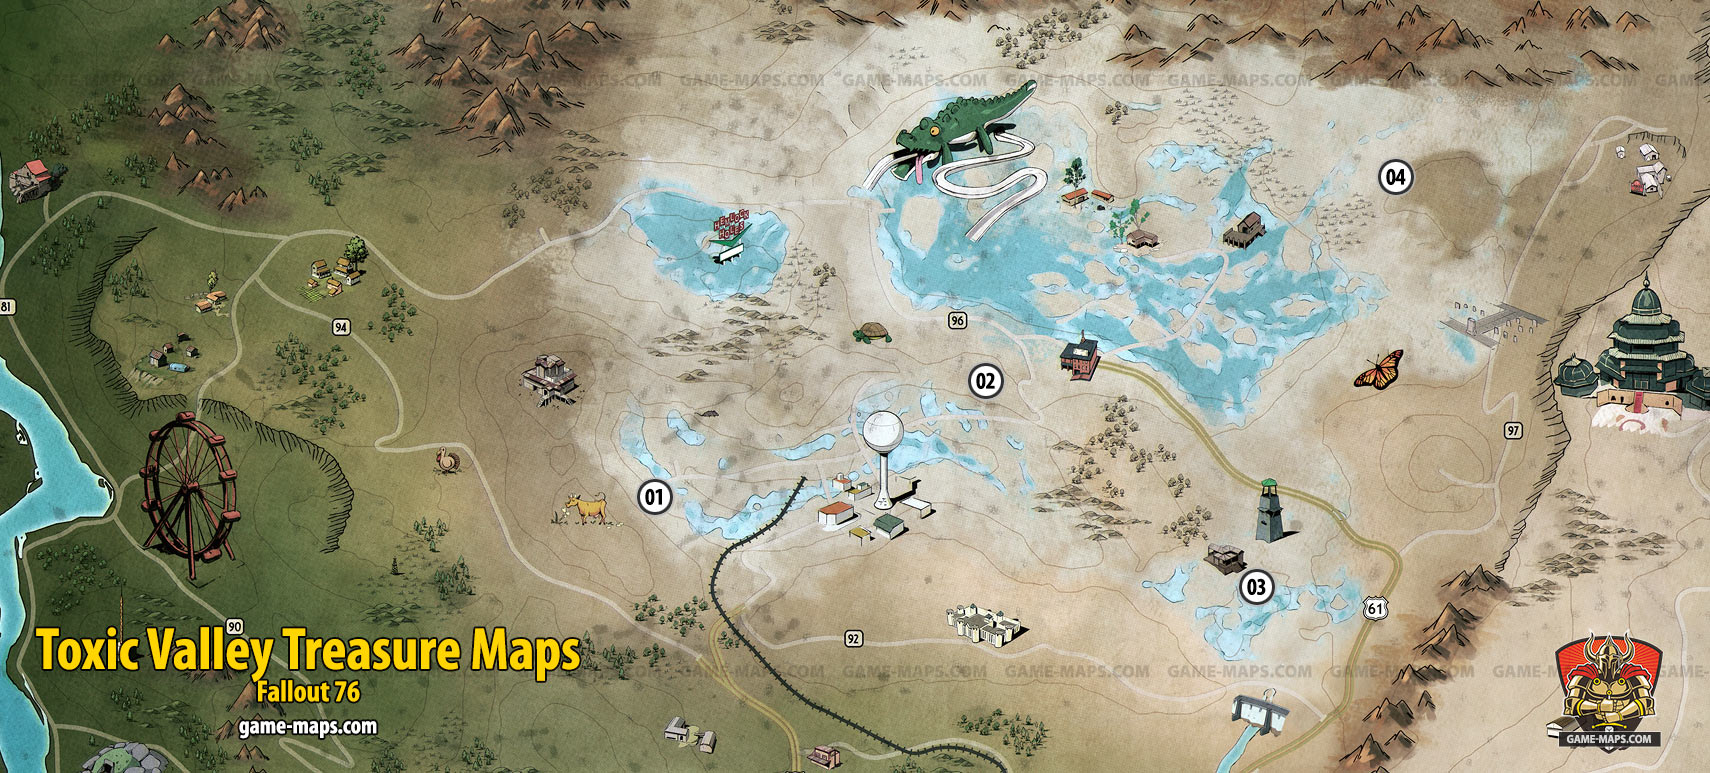 Treasure Maps Toxic Valley for Fallout 76